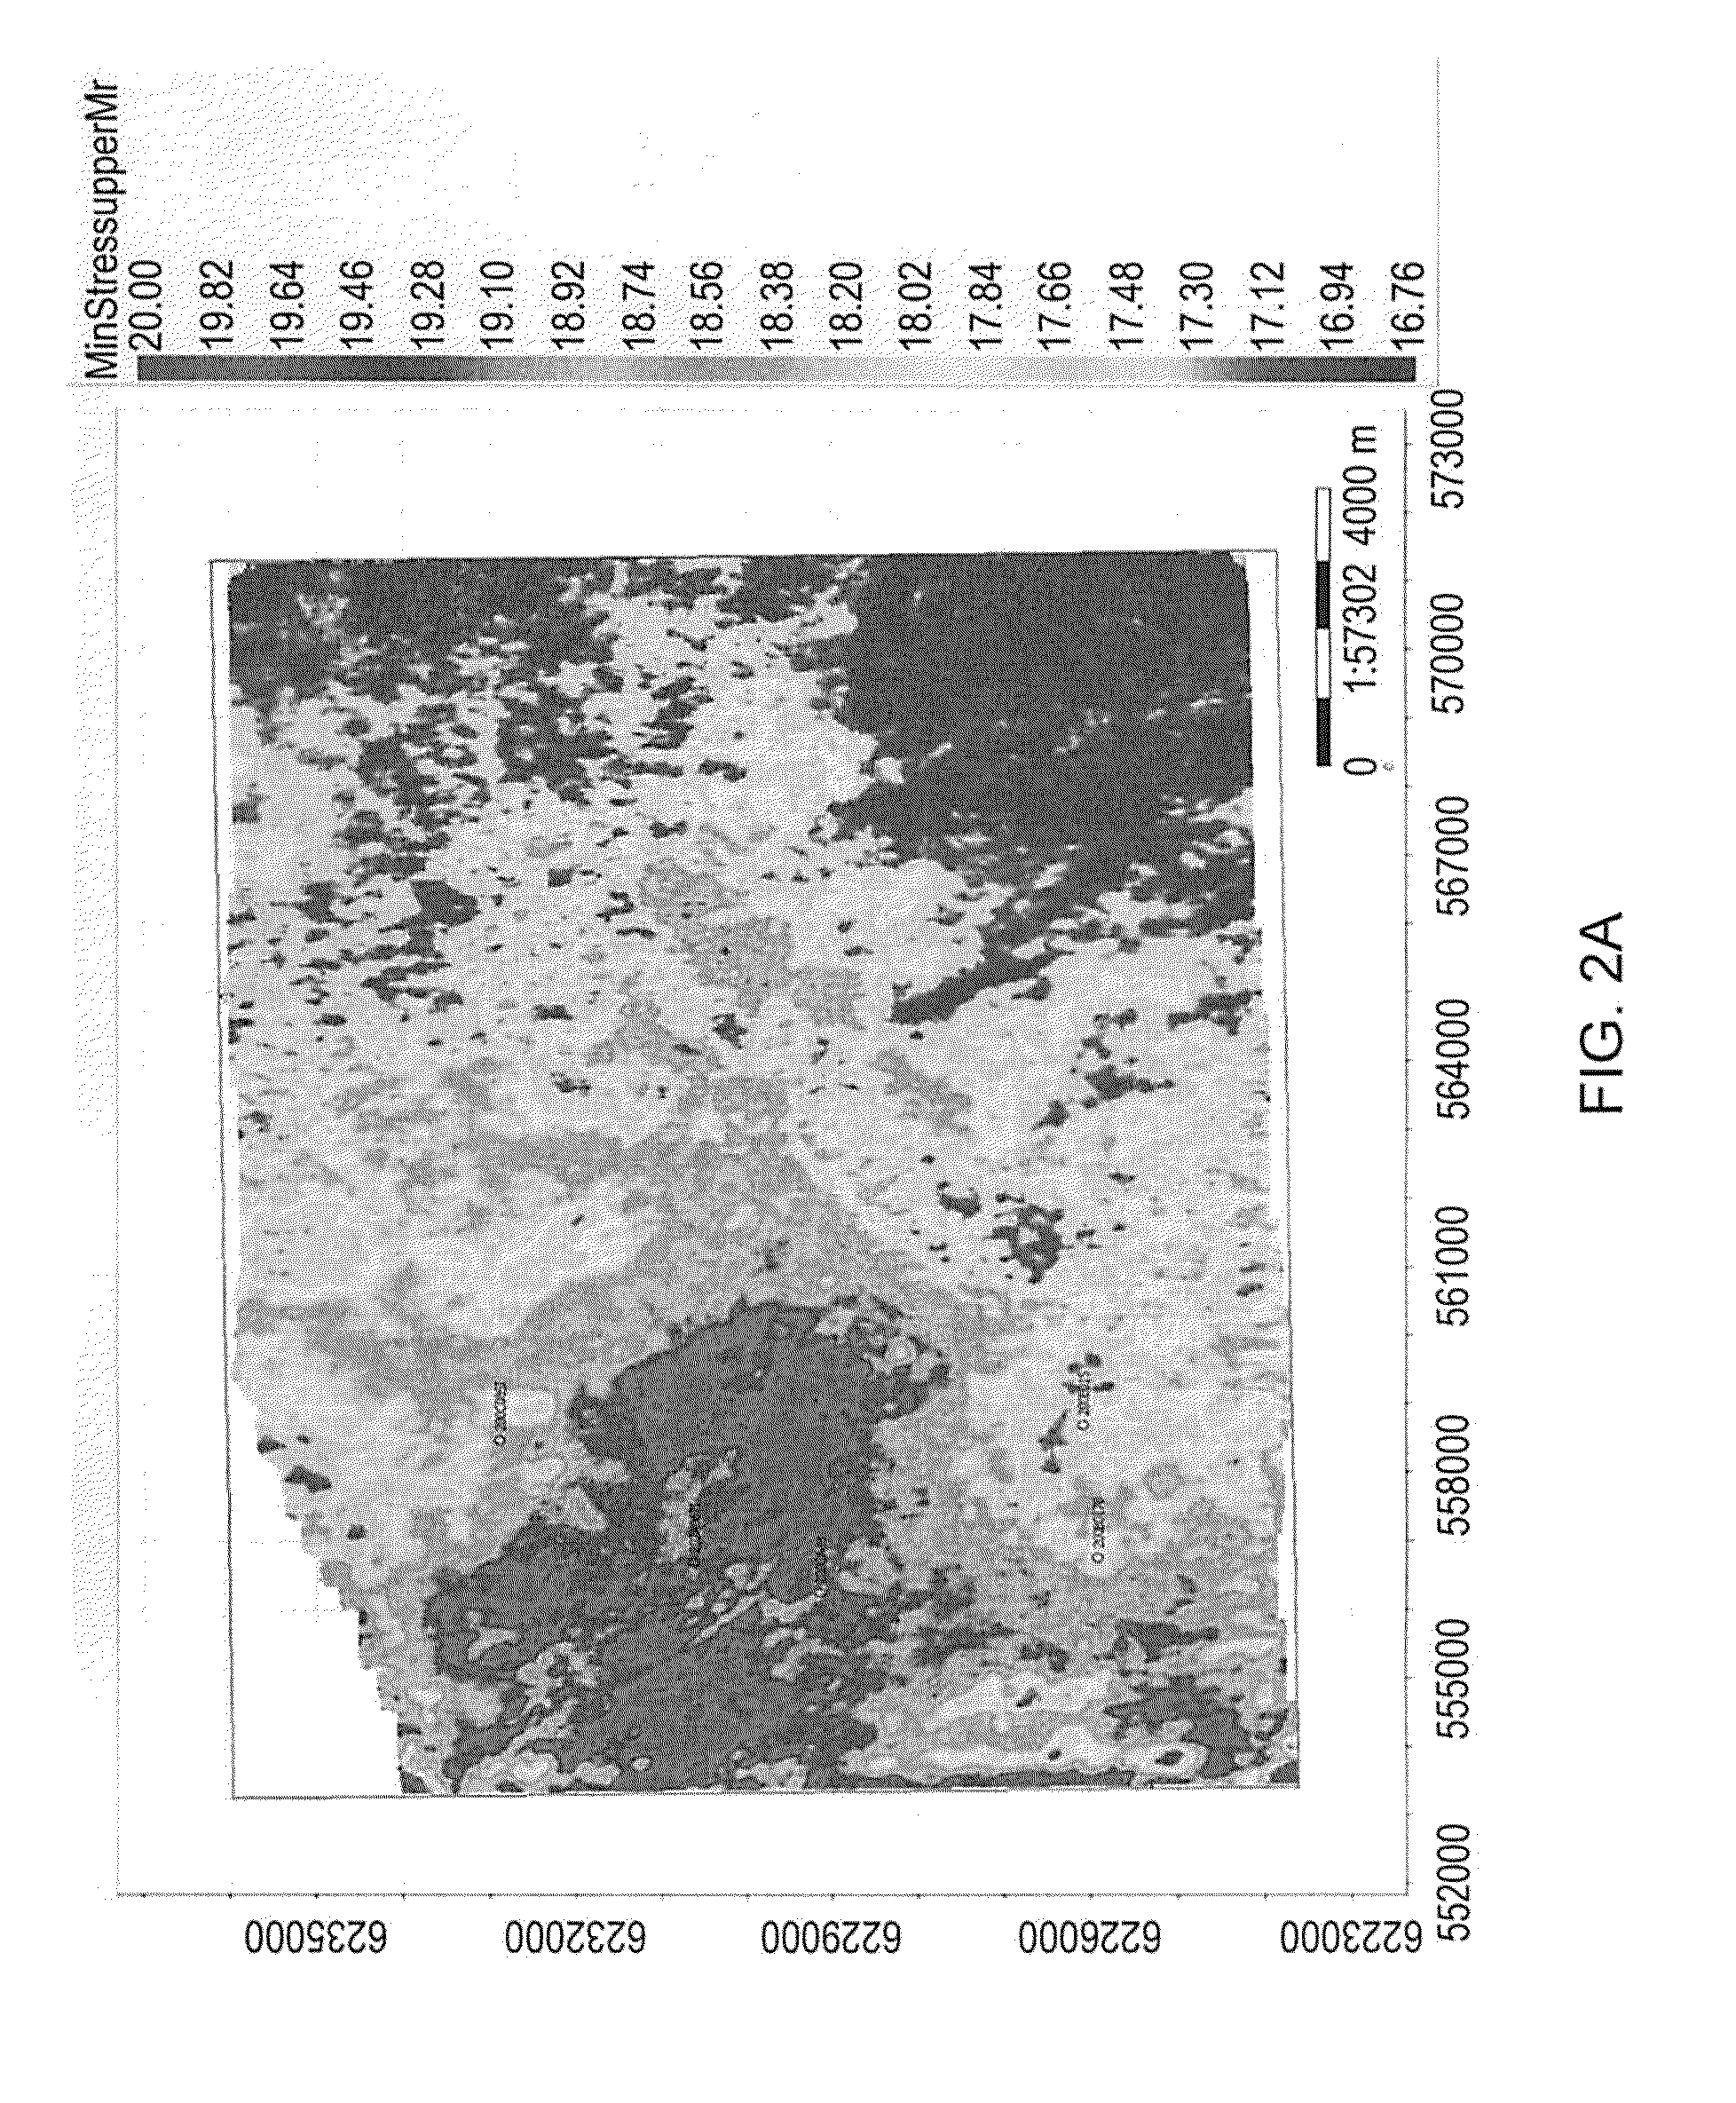 Methods and systems for estimating stress using seismic data